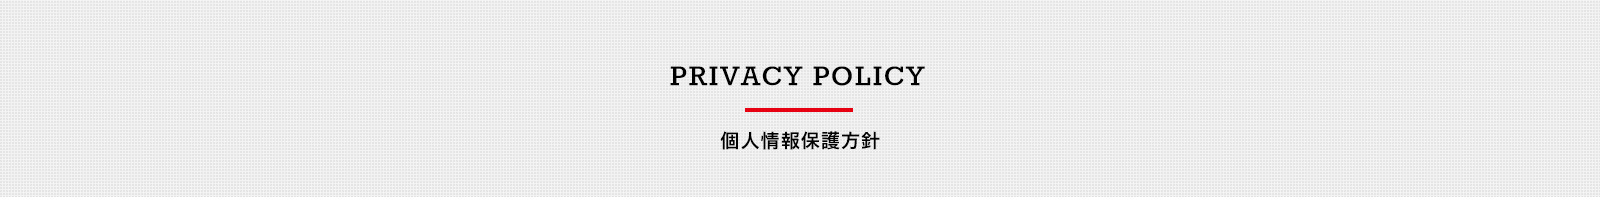 privacy_top_banner